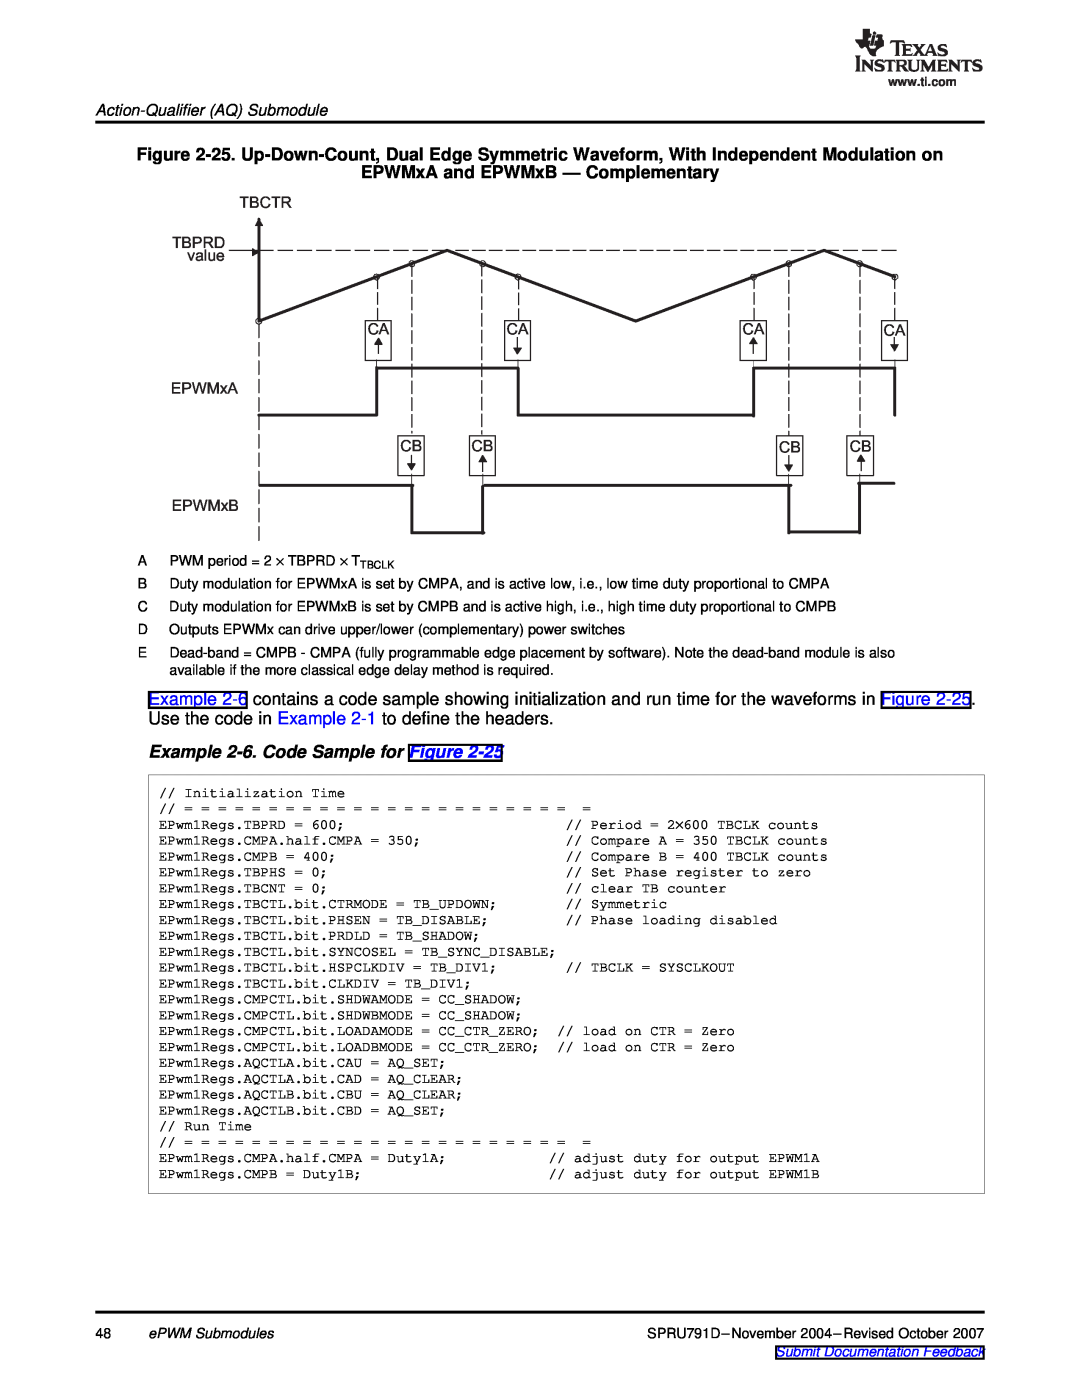 Texas Instruments TMS320x28xx, 28xxx manual EPWMxA and EPWMxB - Complementary, Example 2-6. Code Sample for Figure 